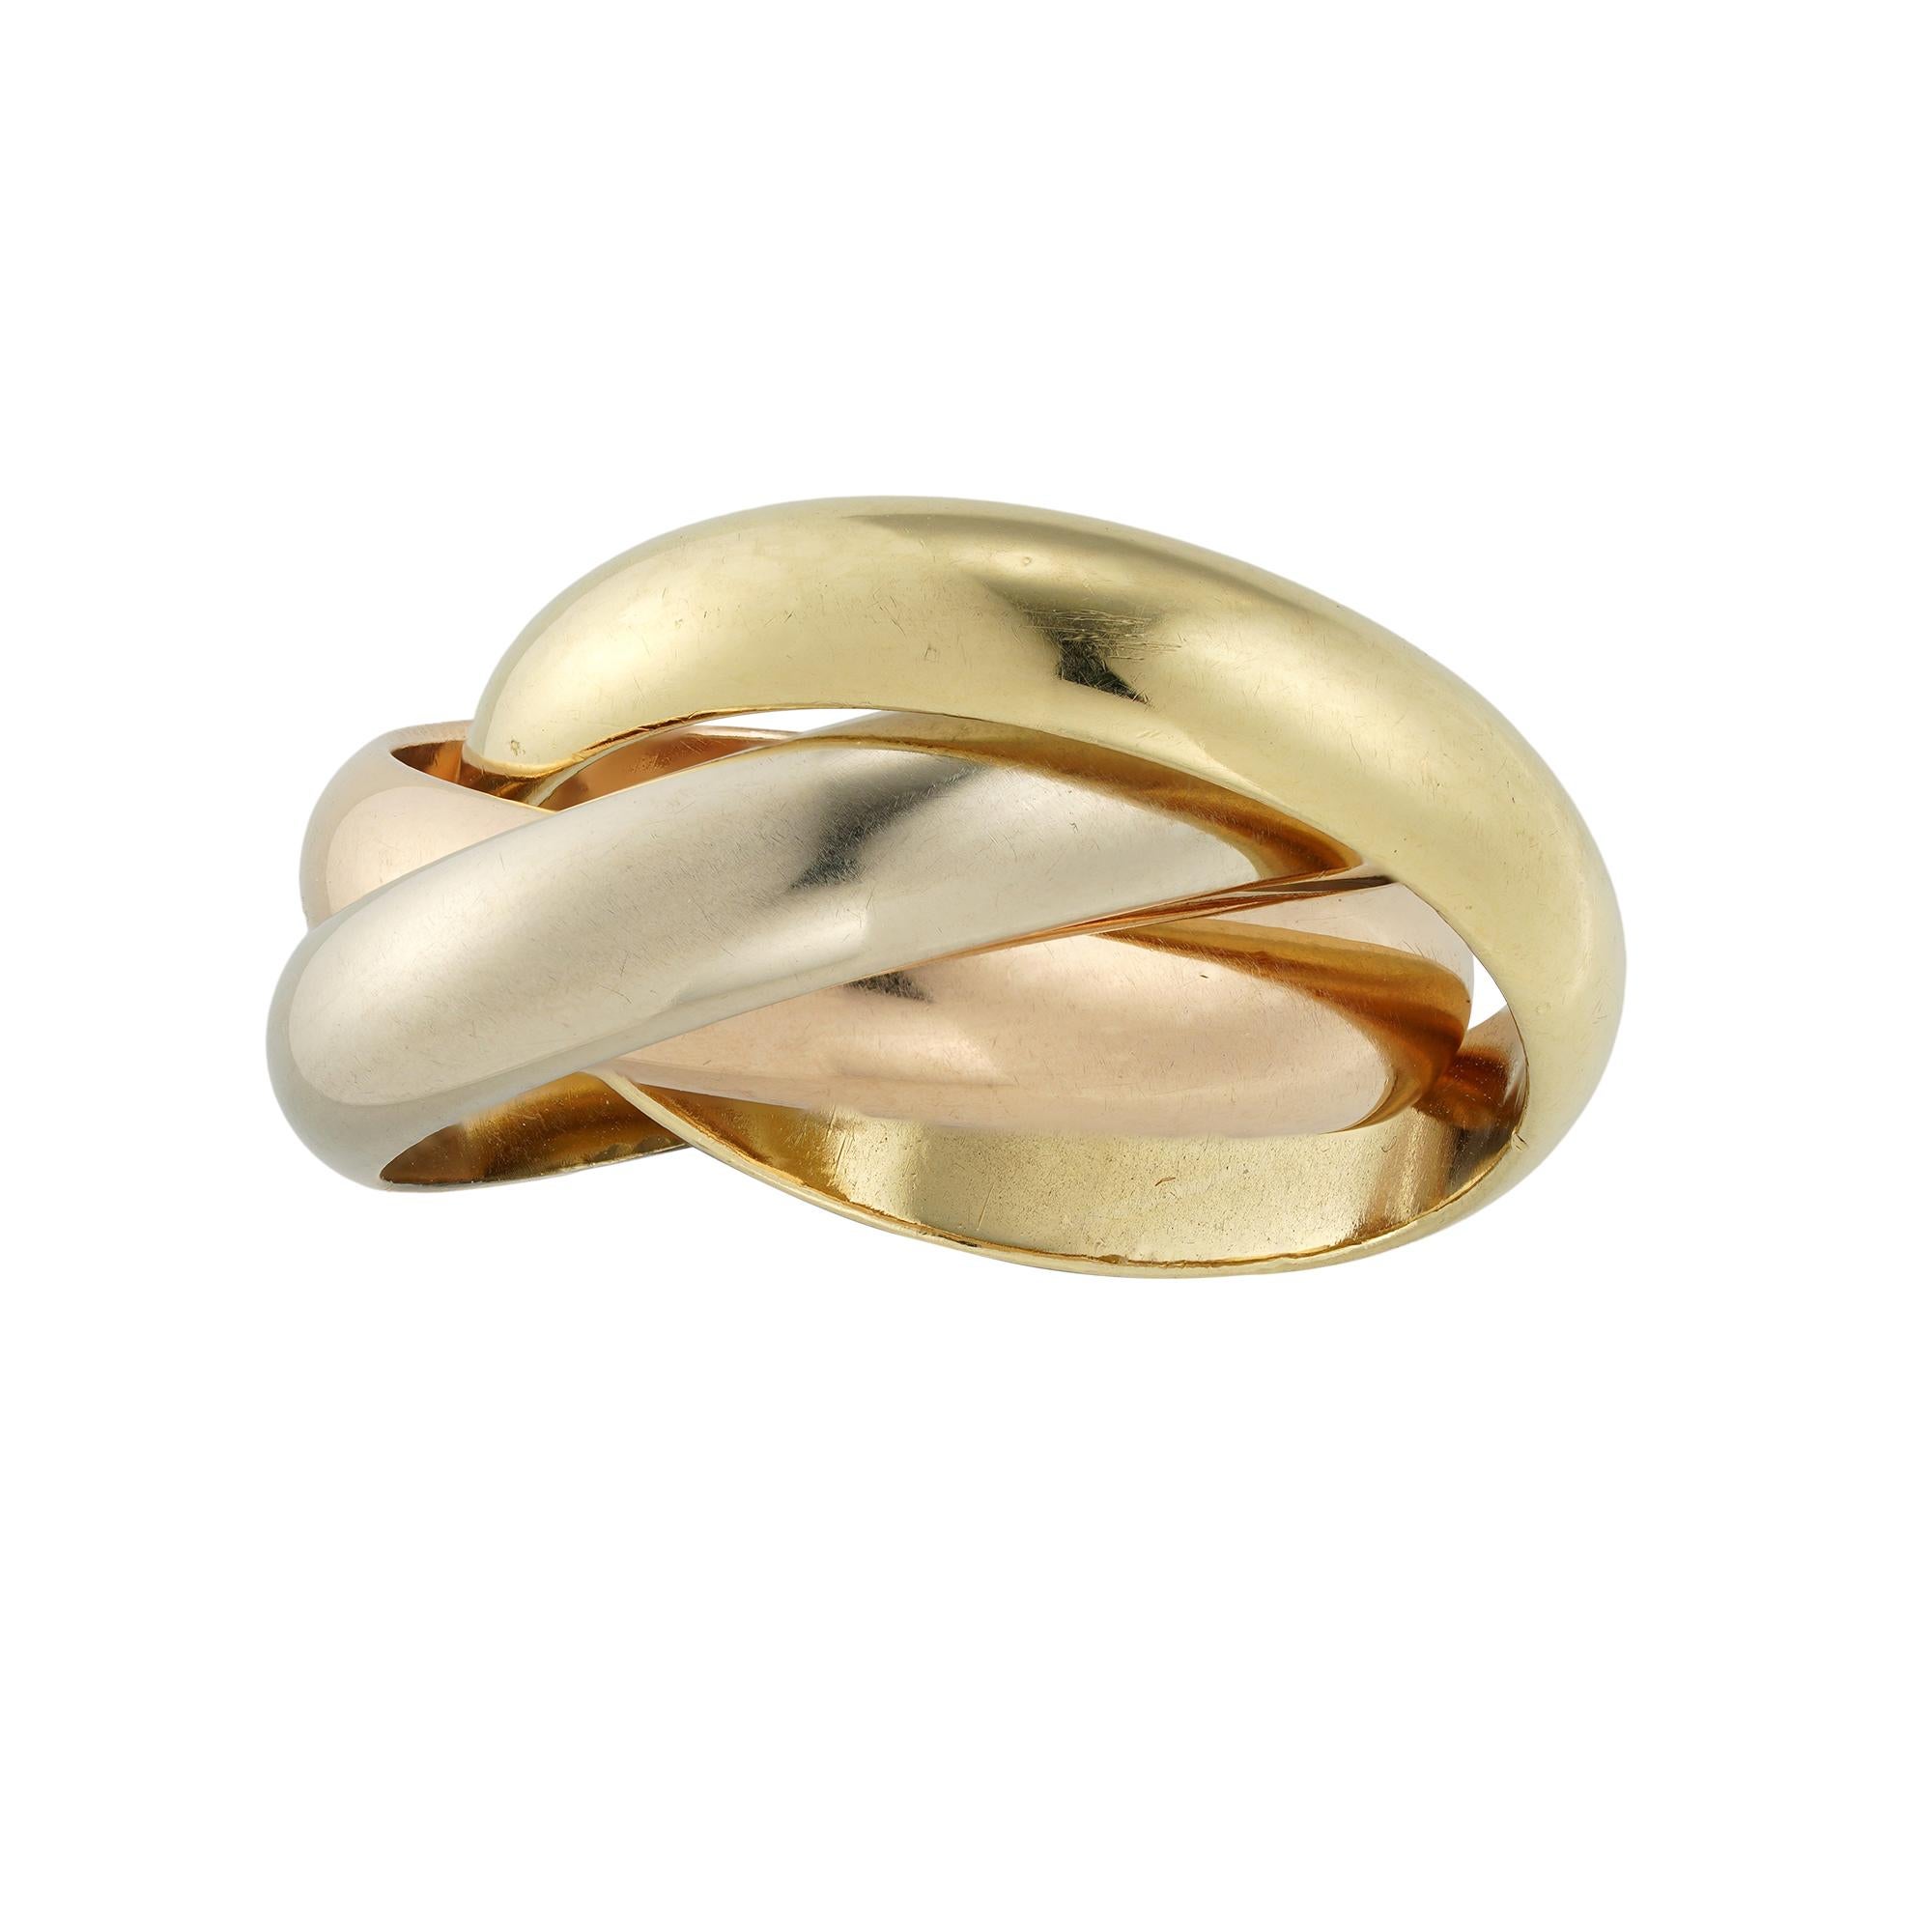 A Cartier Trinity wedding ring, with three bands in white, rose and yellow 18ct gold, each band measuring 4.1mm, signed Cartier, 750, 1997, finger size J 1/2, gross weight 13.9 grams.

This Cartier trinity ring is in very good condition.

This